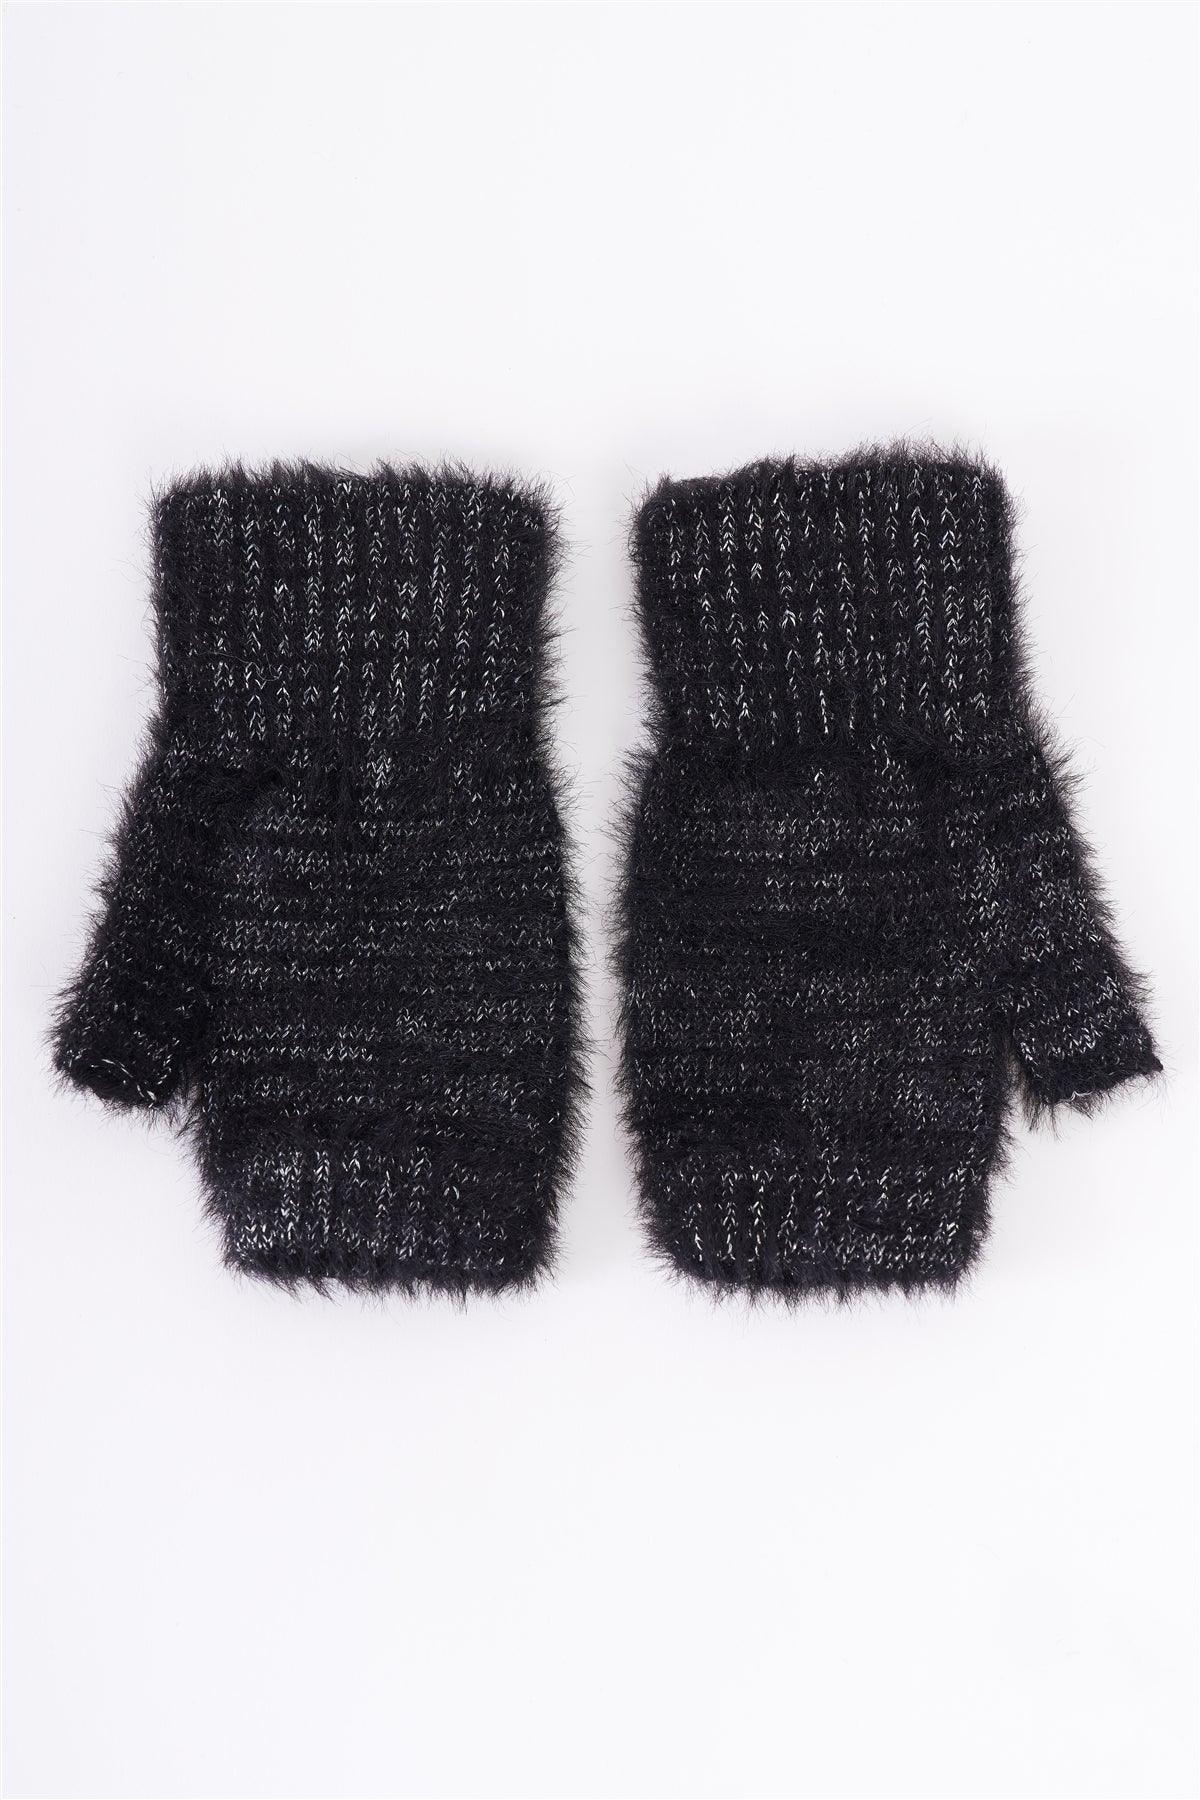 Black Silver Threading Rhinestone Star Embroidery Furry Fingerless Winter Gloves /3 Pieces